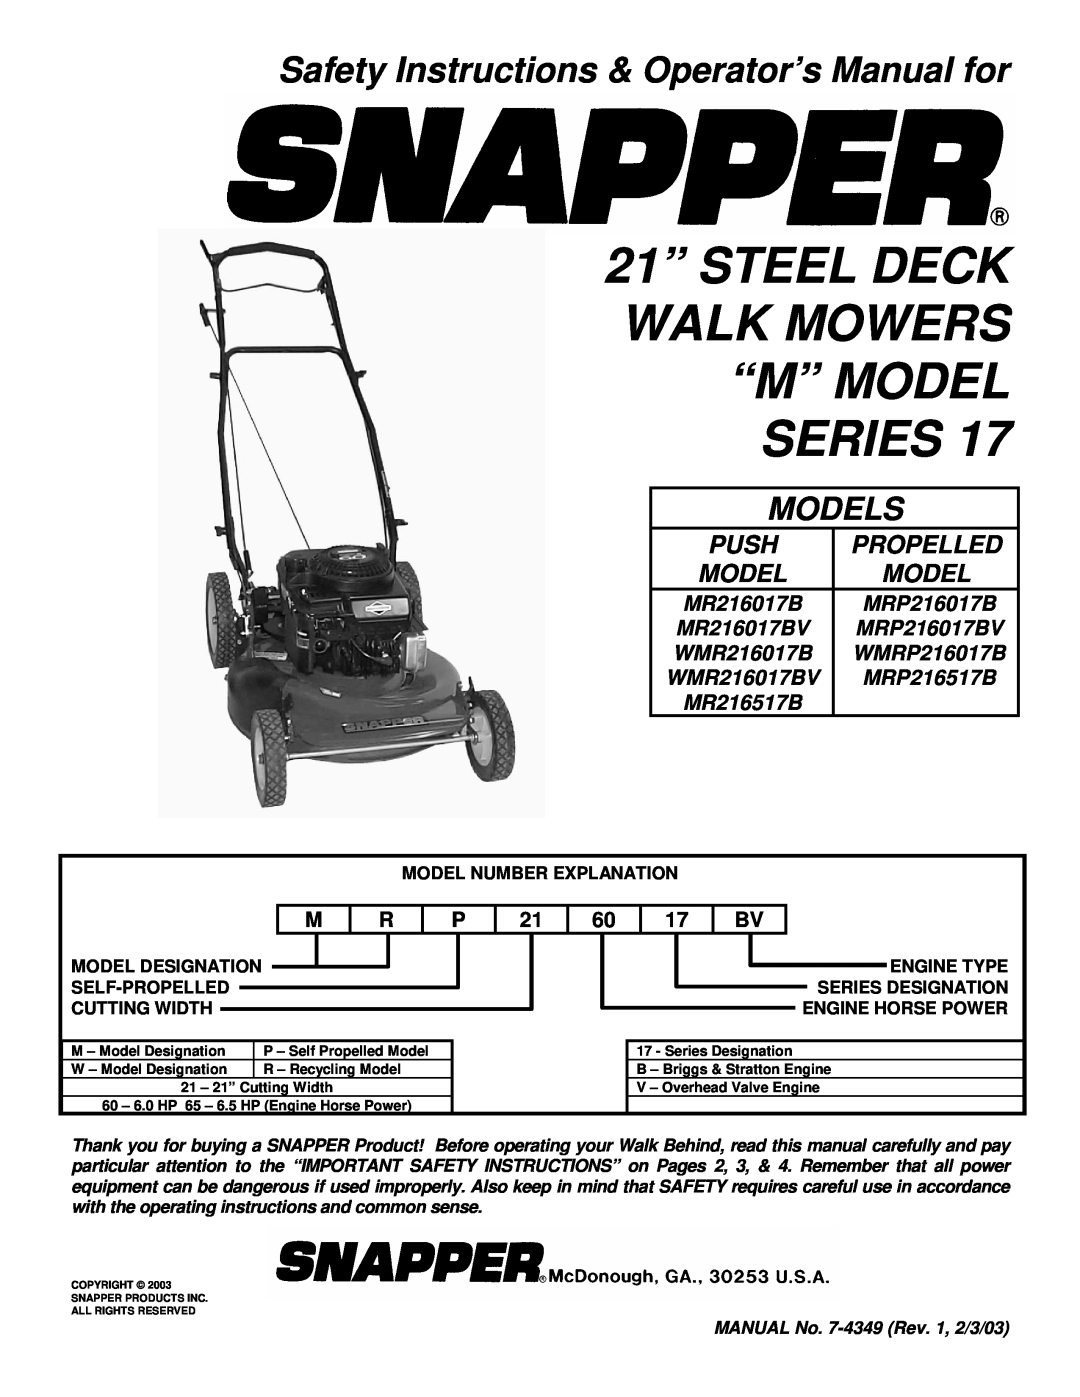 Snapper MR216017B important safety instructions 21” STEEL DECK WALK MOWERS “M” MODEL SERIES, Models, Push, Propelled 